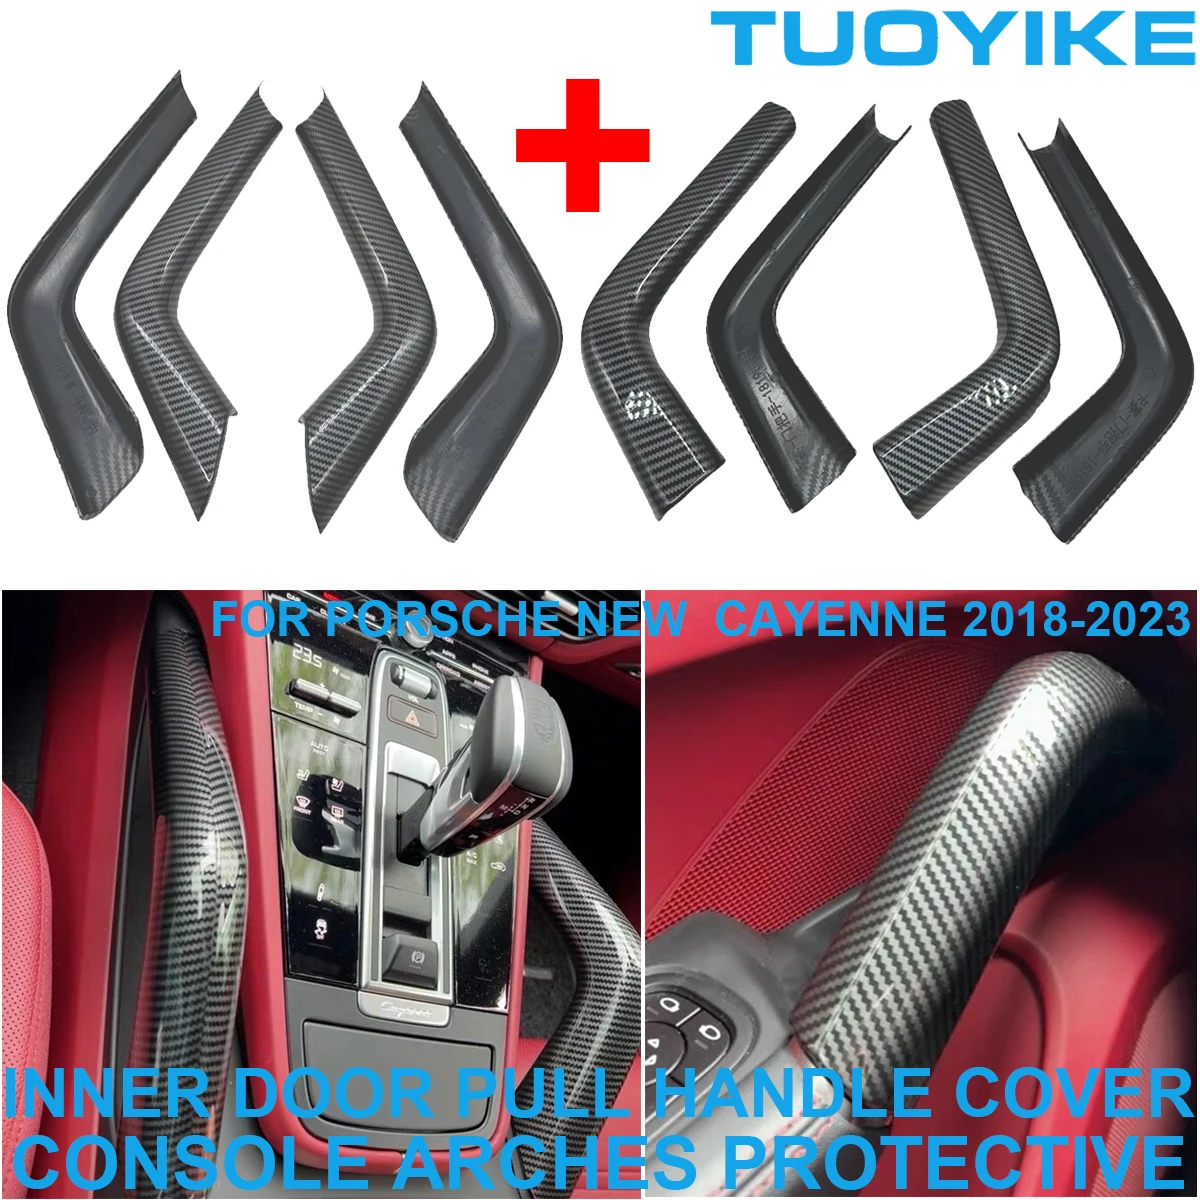 

LHD RHD Car ABS Carbon Fiber Trim For Porsche Cayenne 2018-23 Inner Door Handle Cover Armrest Central Console Arches Protective